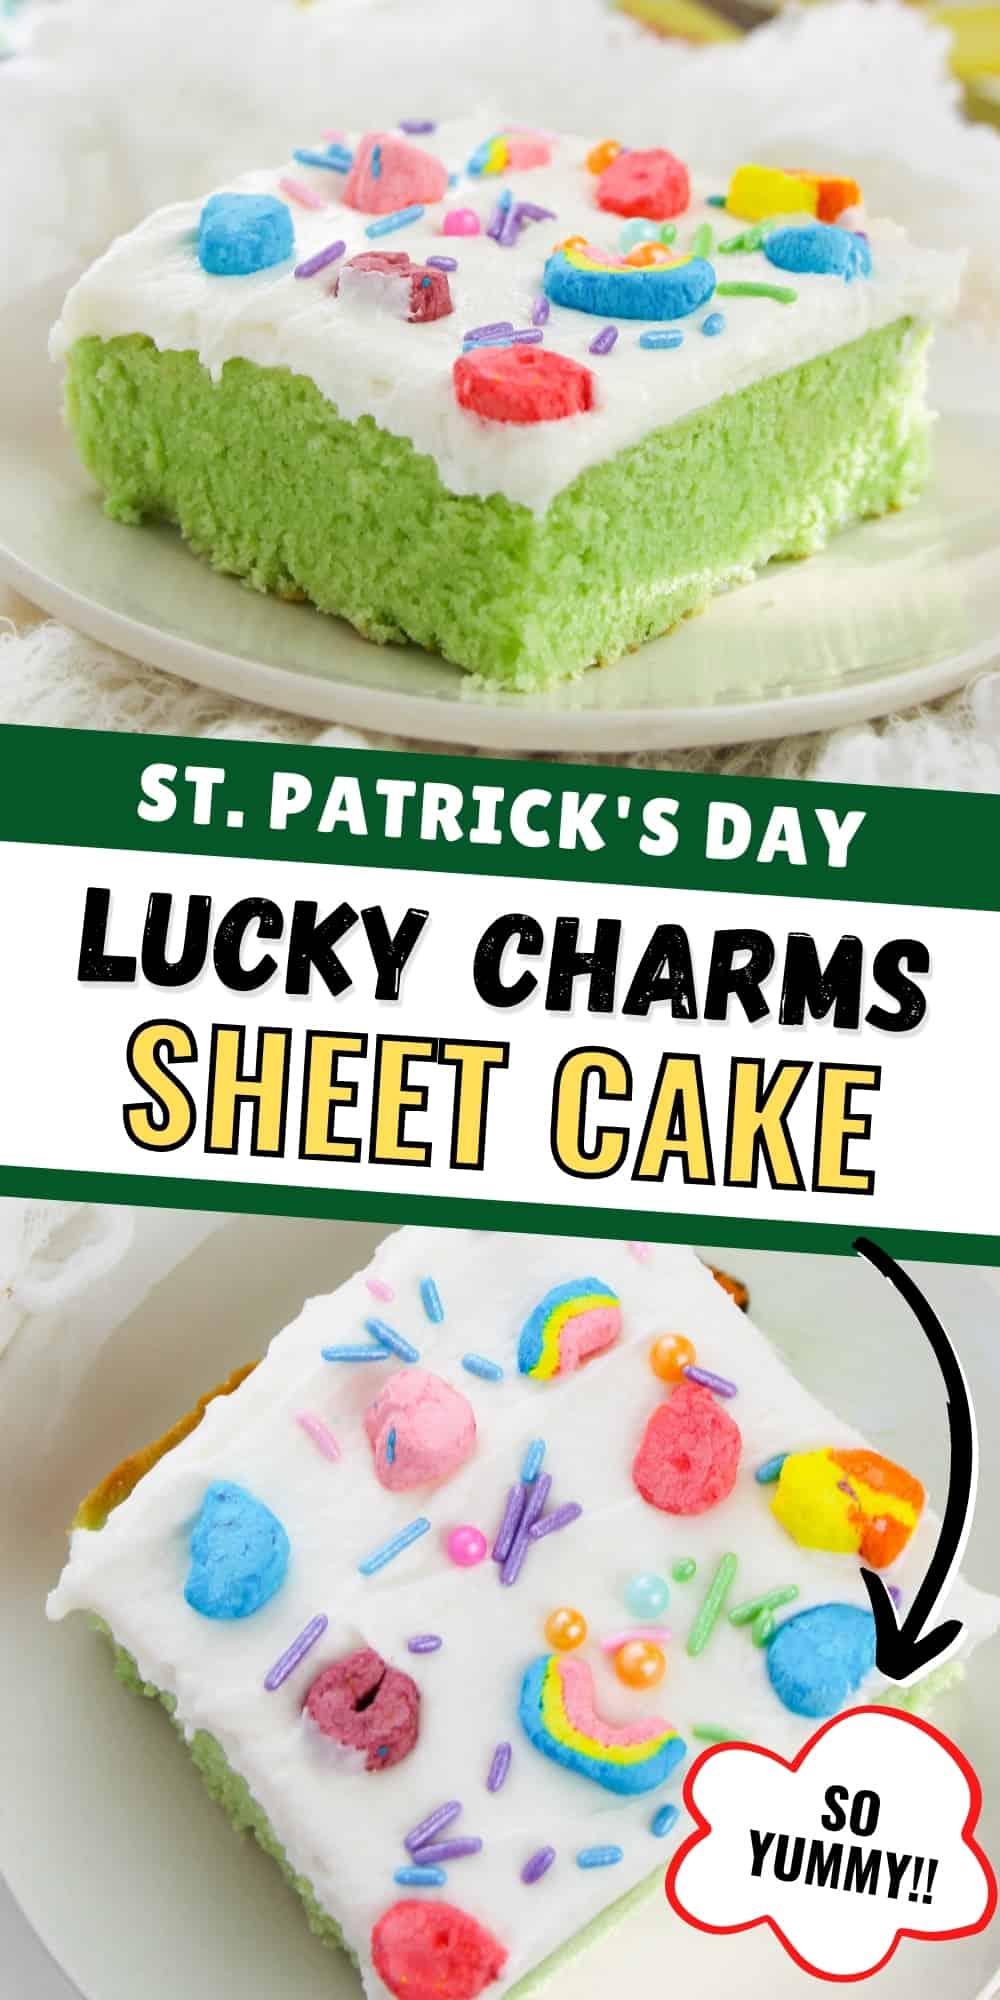 St. Patrick's Day Lucky Charms Sheet Cake Pin